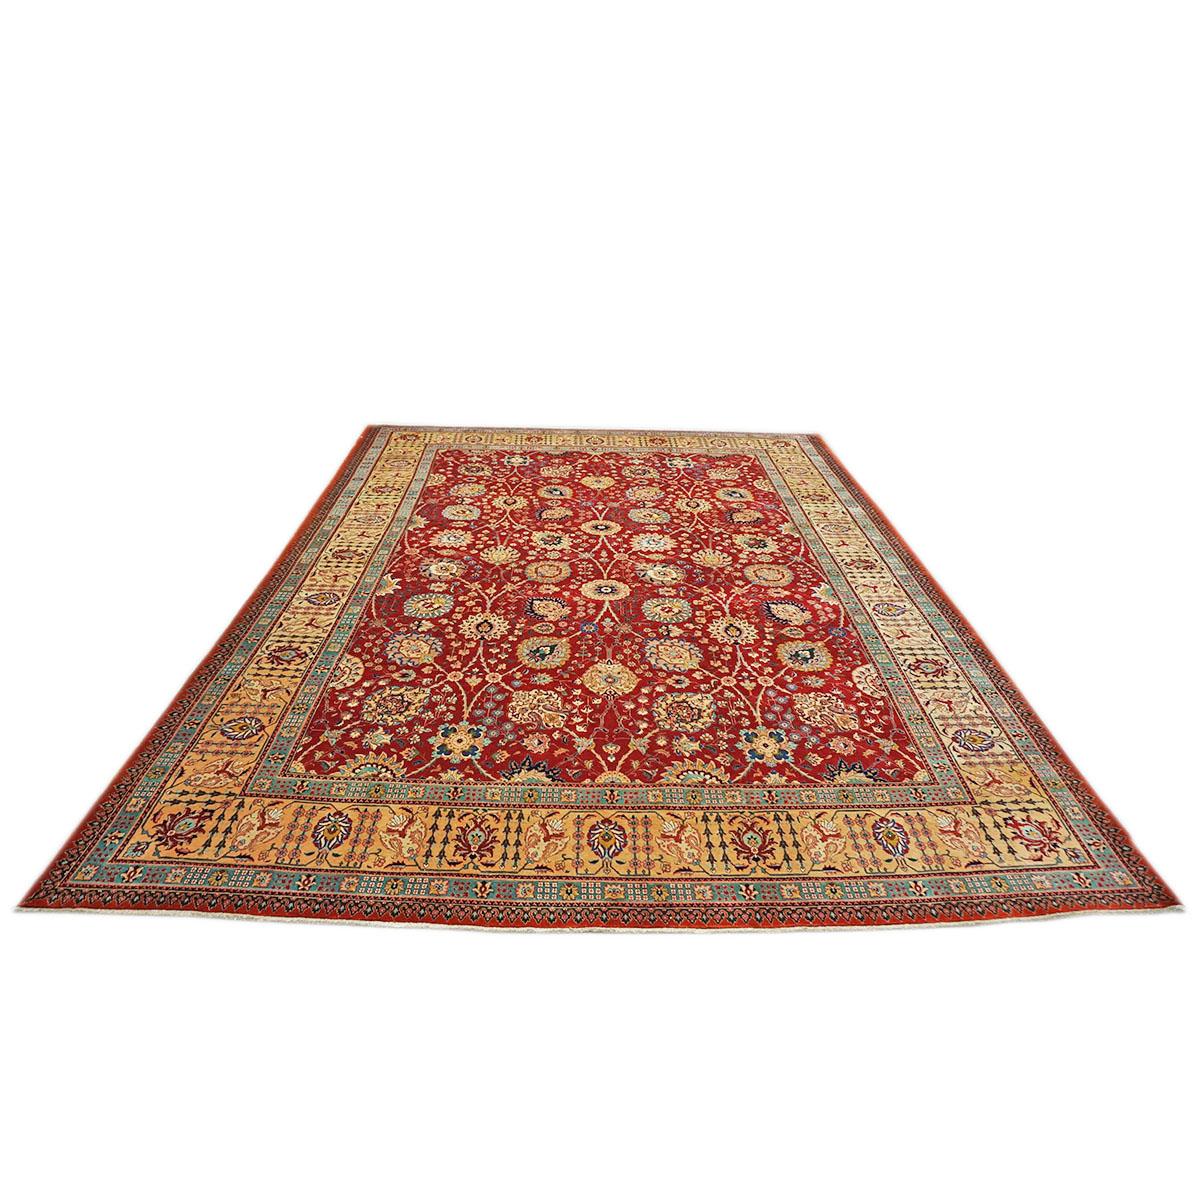 Hand-Woven 20th Century Antique Persian Tabriz Pahlavi 10x13 Red & Gold Handmade Area Rug For Sale